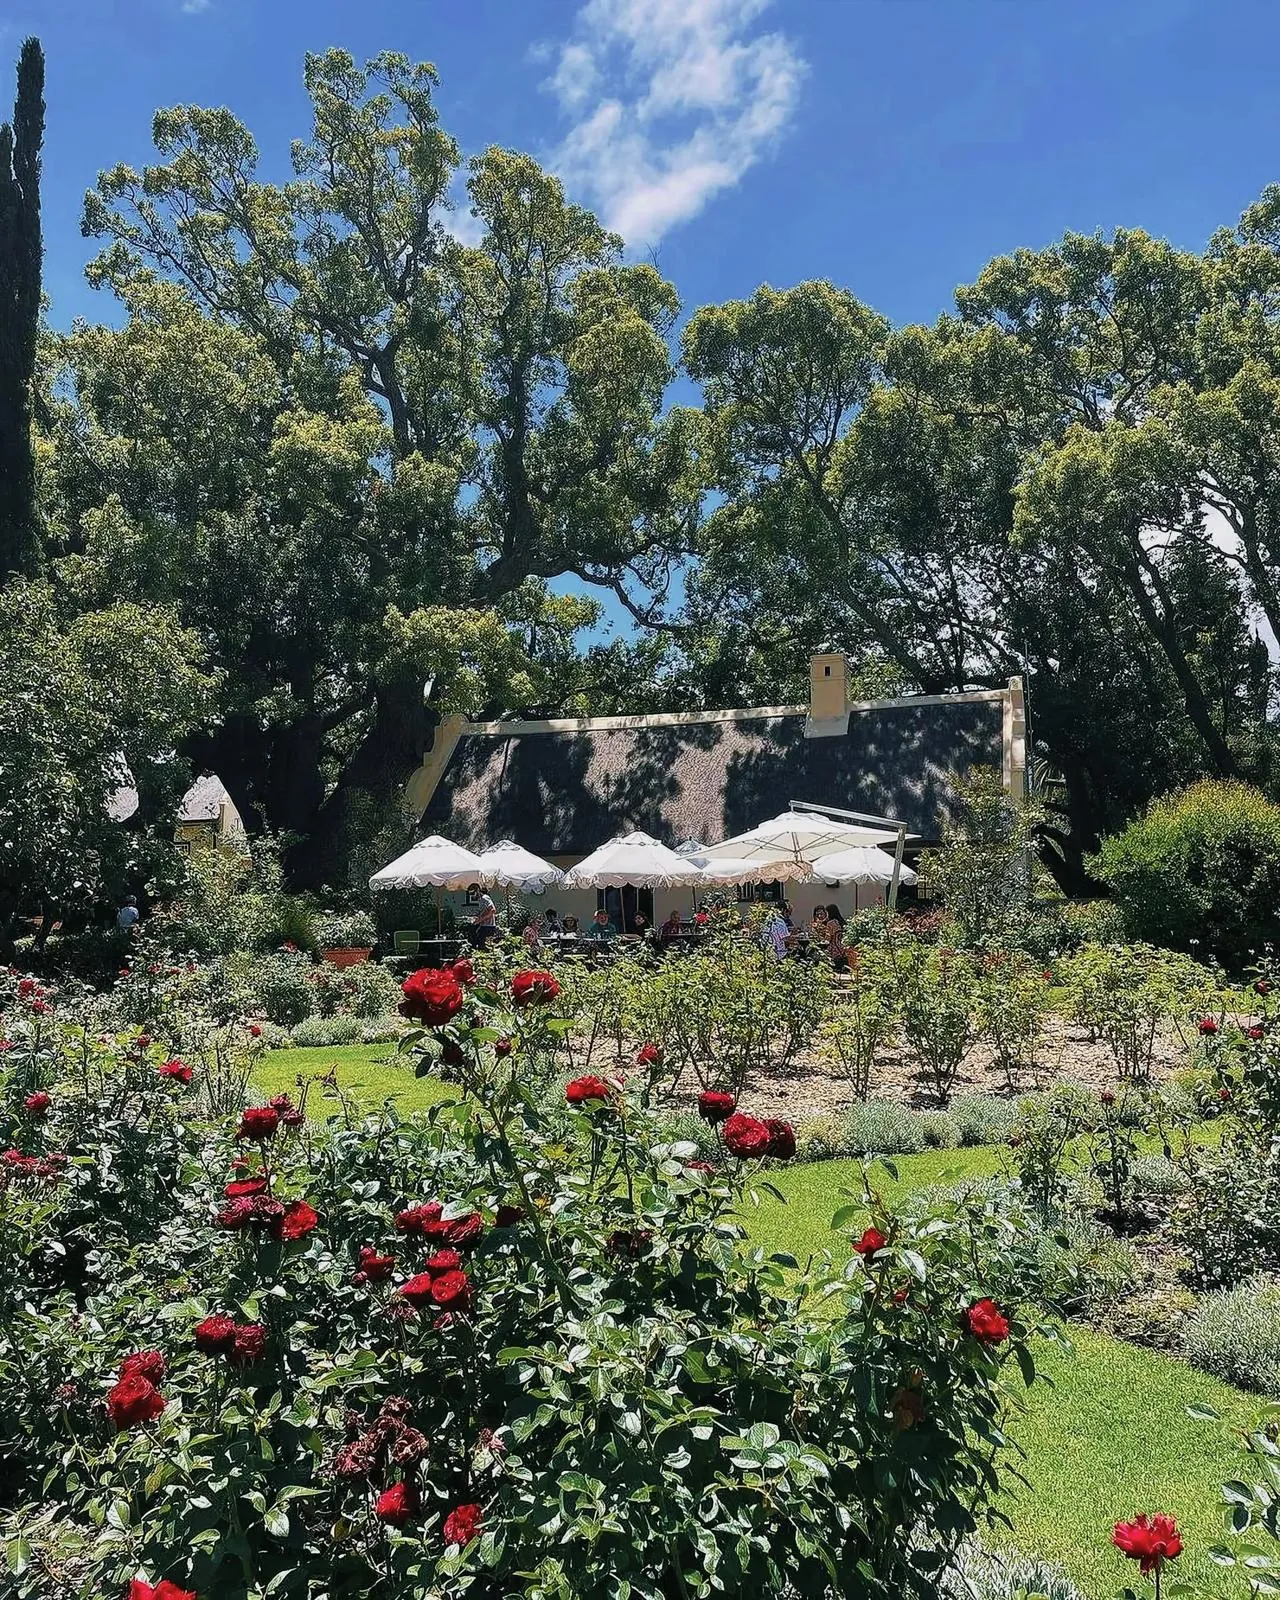 Beautifully maintained garden with red roses and white umbrellas